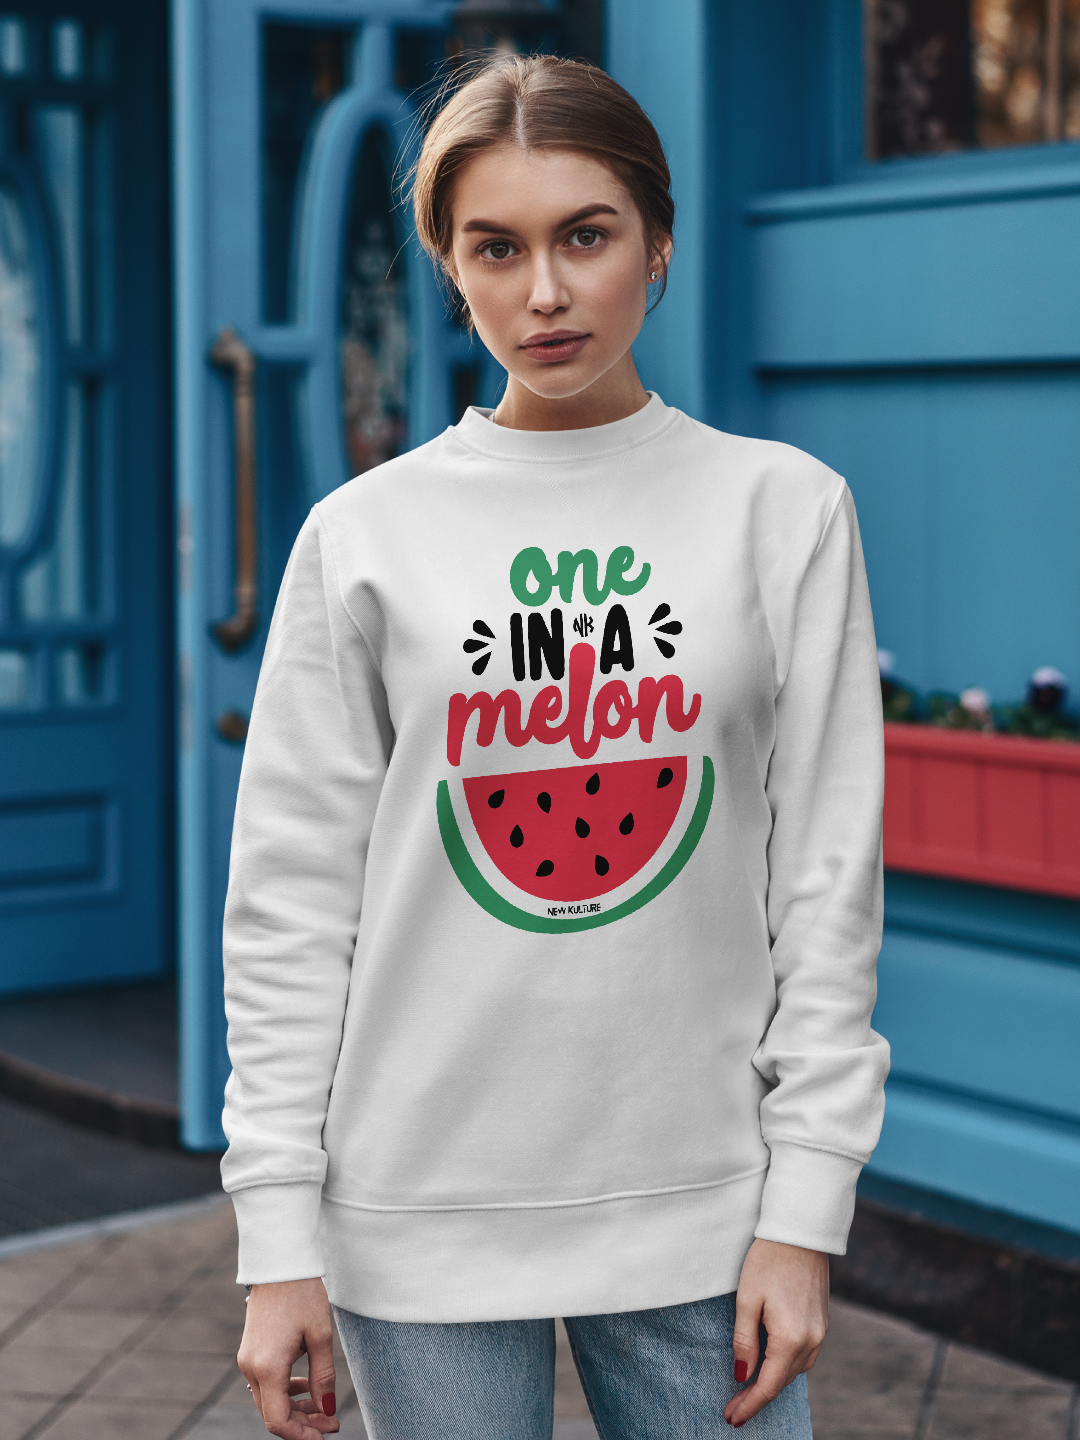 Women's Oversized Sweatshirt with 'One in a melon' Design – White Color Option